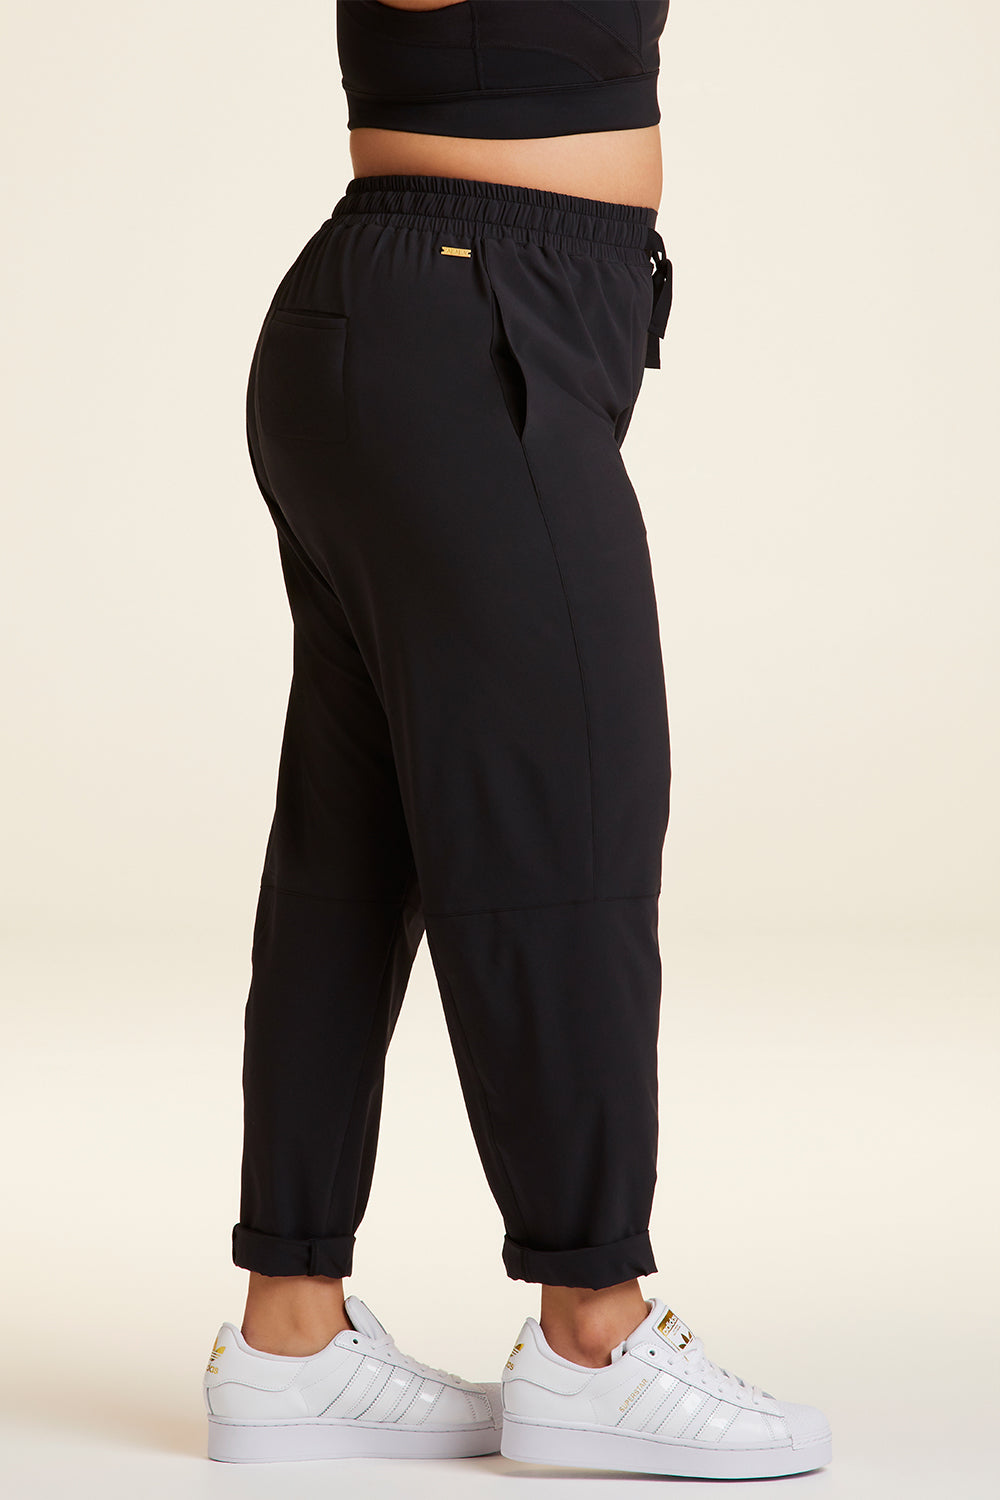 Gramercy Pant in Acclaimed Stretch | Lafayette 148 New York